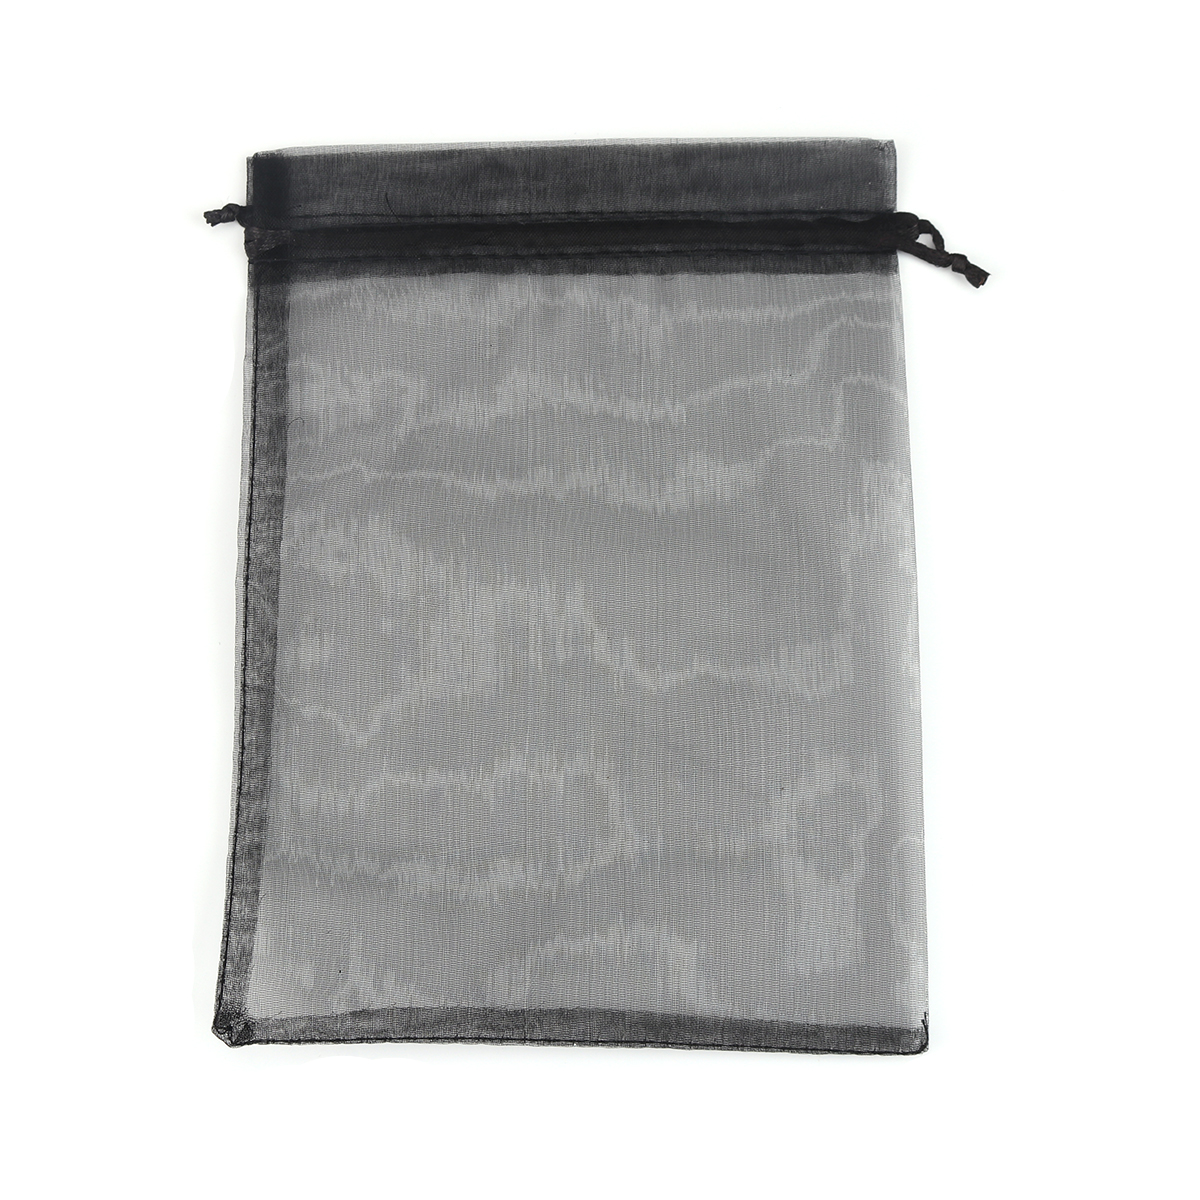 Picture of Wedding Gift Organza Jewelry Bags Drawstring Rectangle Black 20cm x15cm(7 7/8" x5 7/8"), (Usable Space: 17x14.5cm) 20 PCs